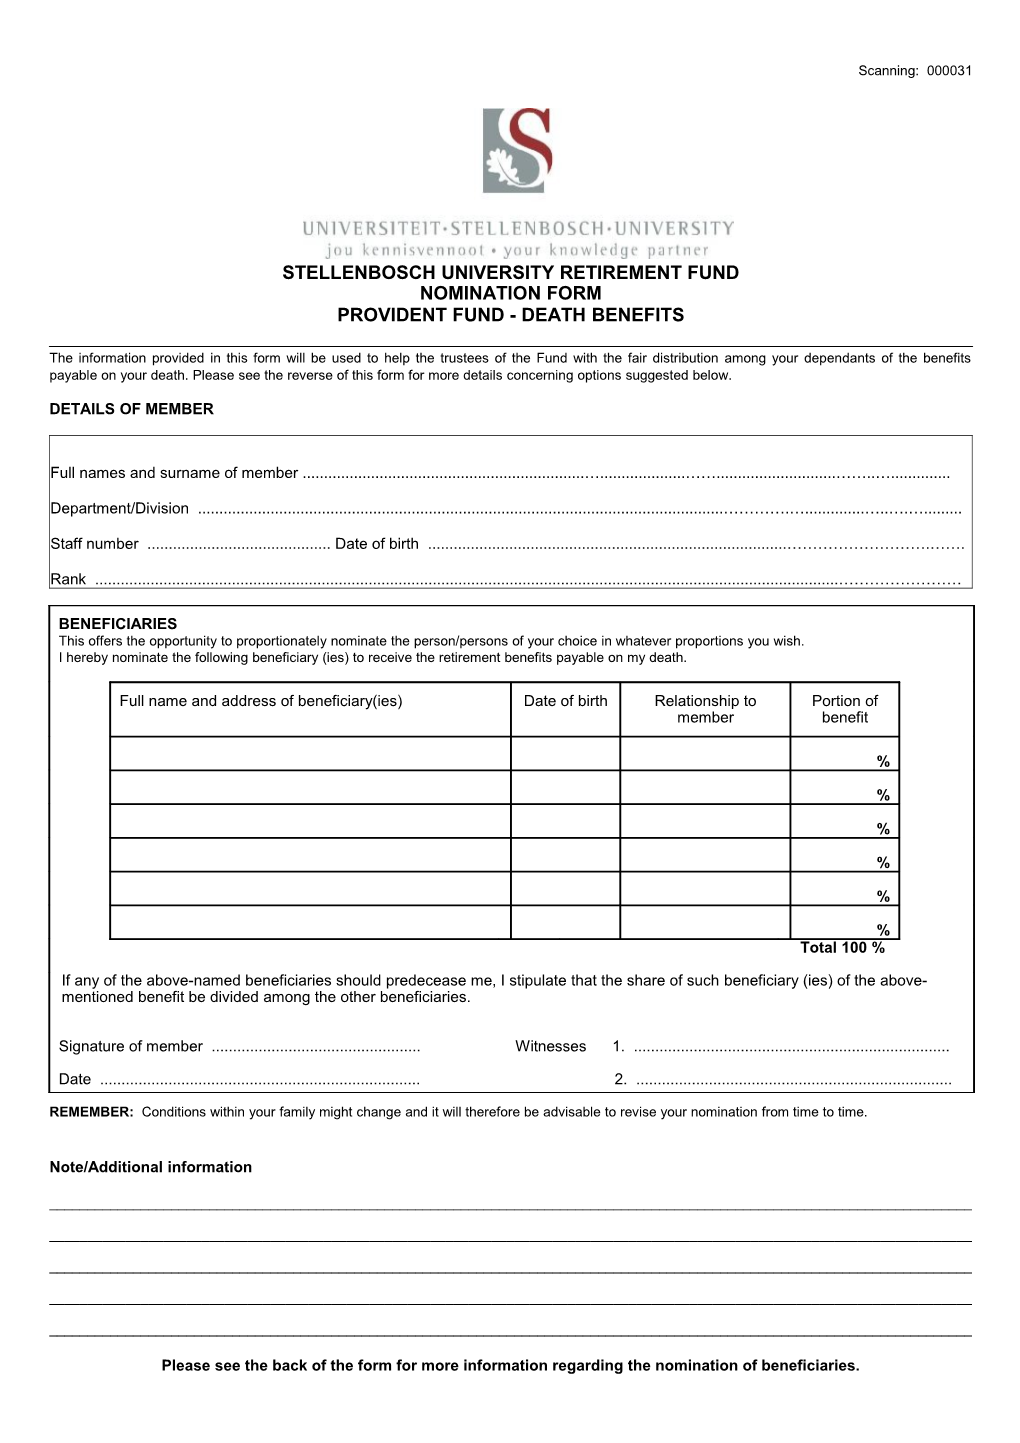 Nomination Form for Provident Fund